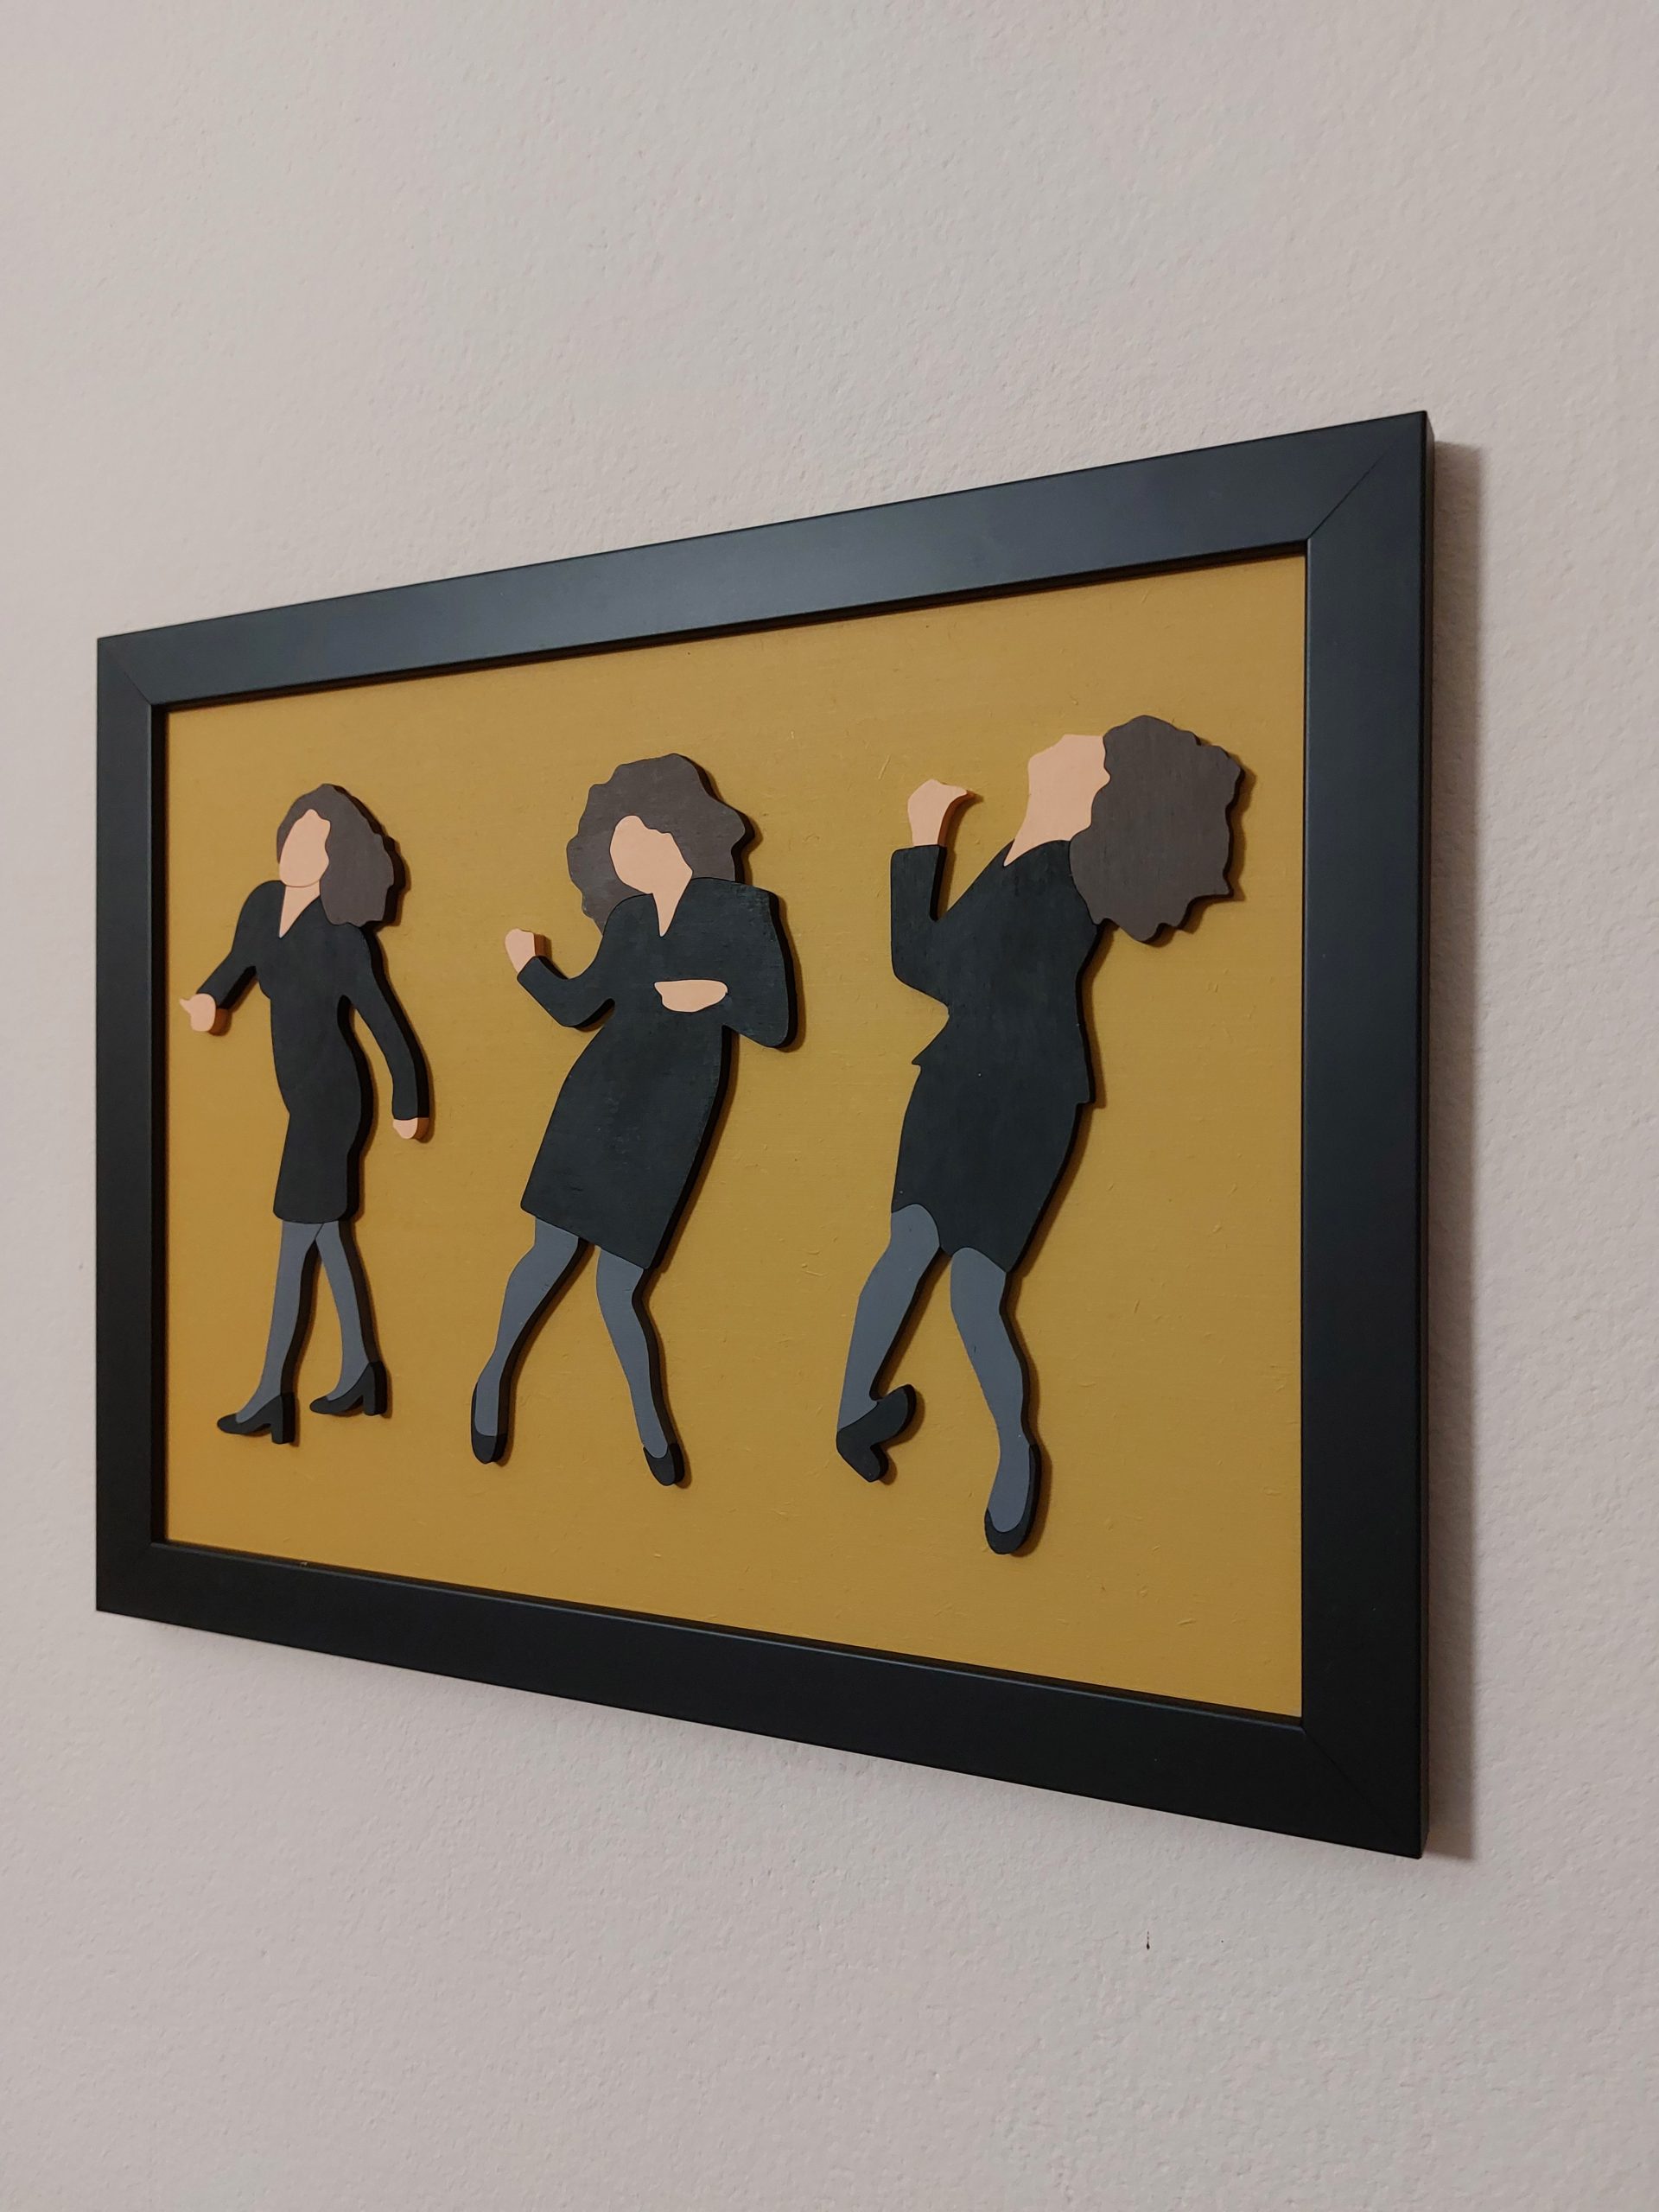 I made Elaine’s dancing from Seinfeld as a wood wall portion. I am hoping you want it.